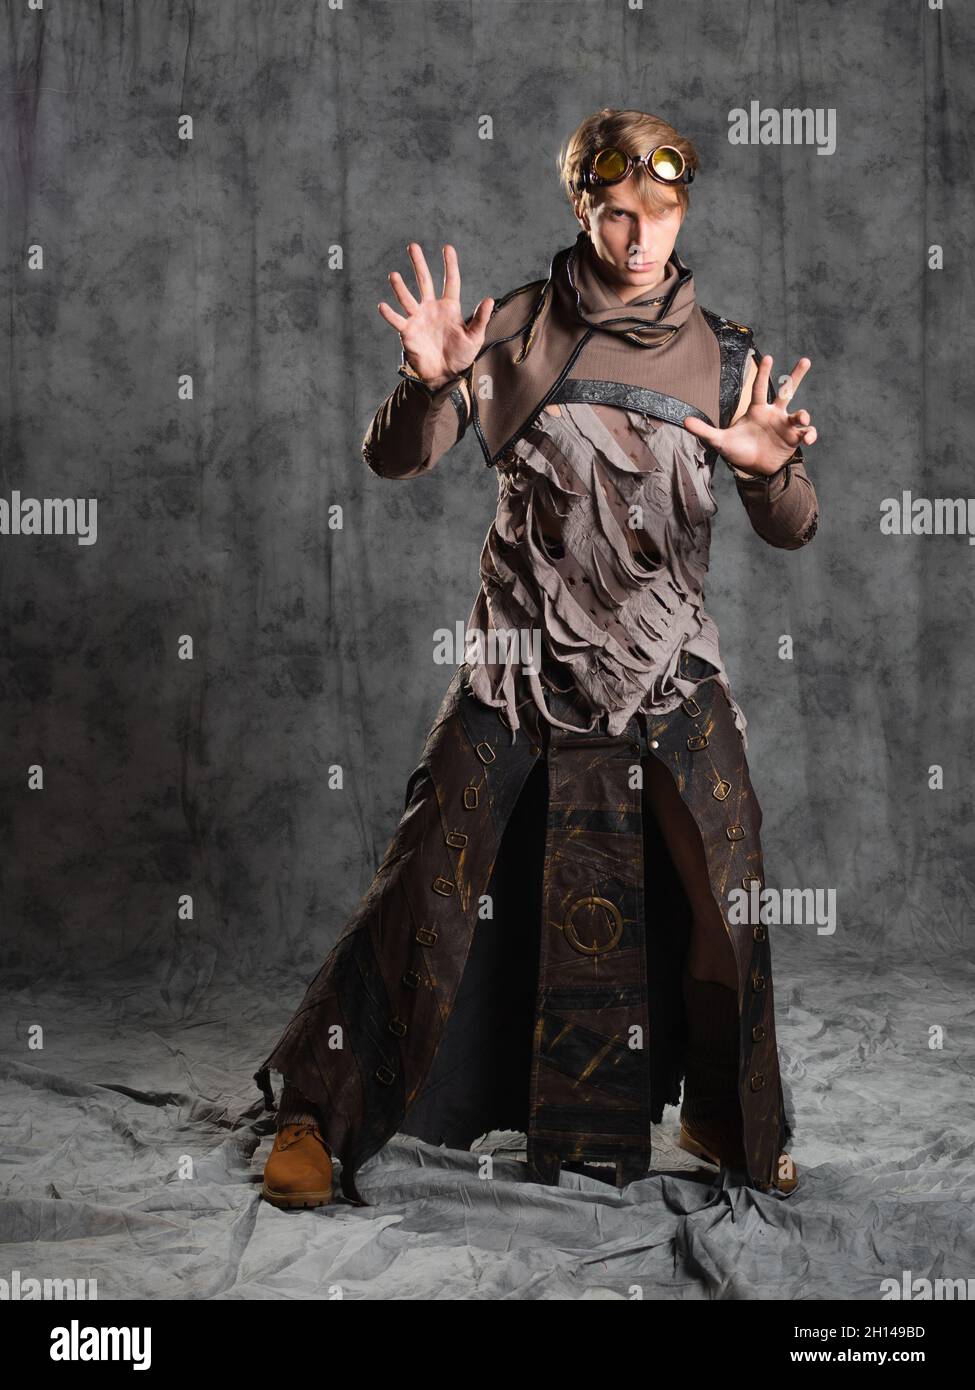 Steampunk or post-apocalyptic style character, a young man in a grunge suit. A jacket with fastened sleeves decorated with slits and a long leather sk Stock Photo